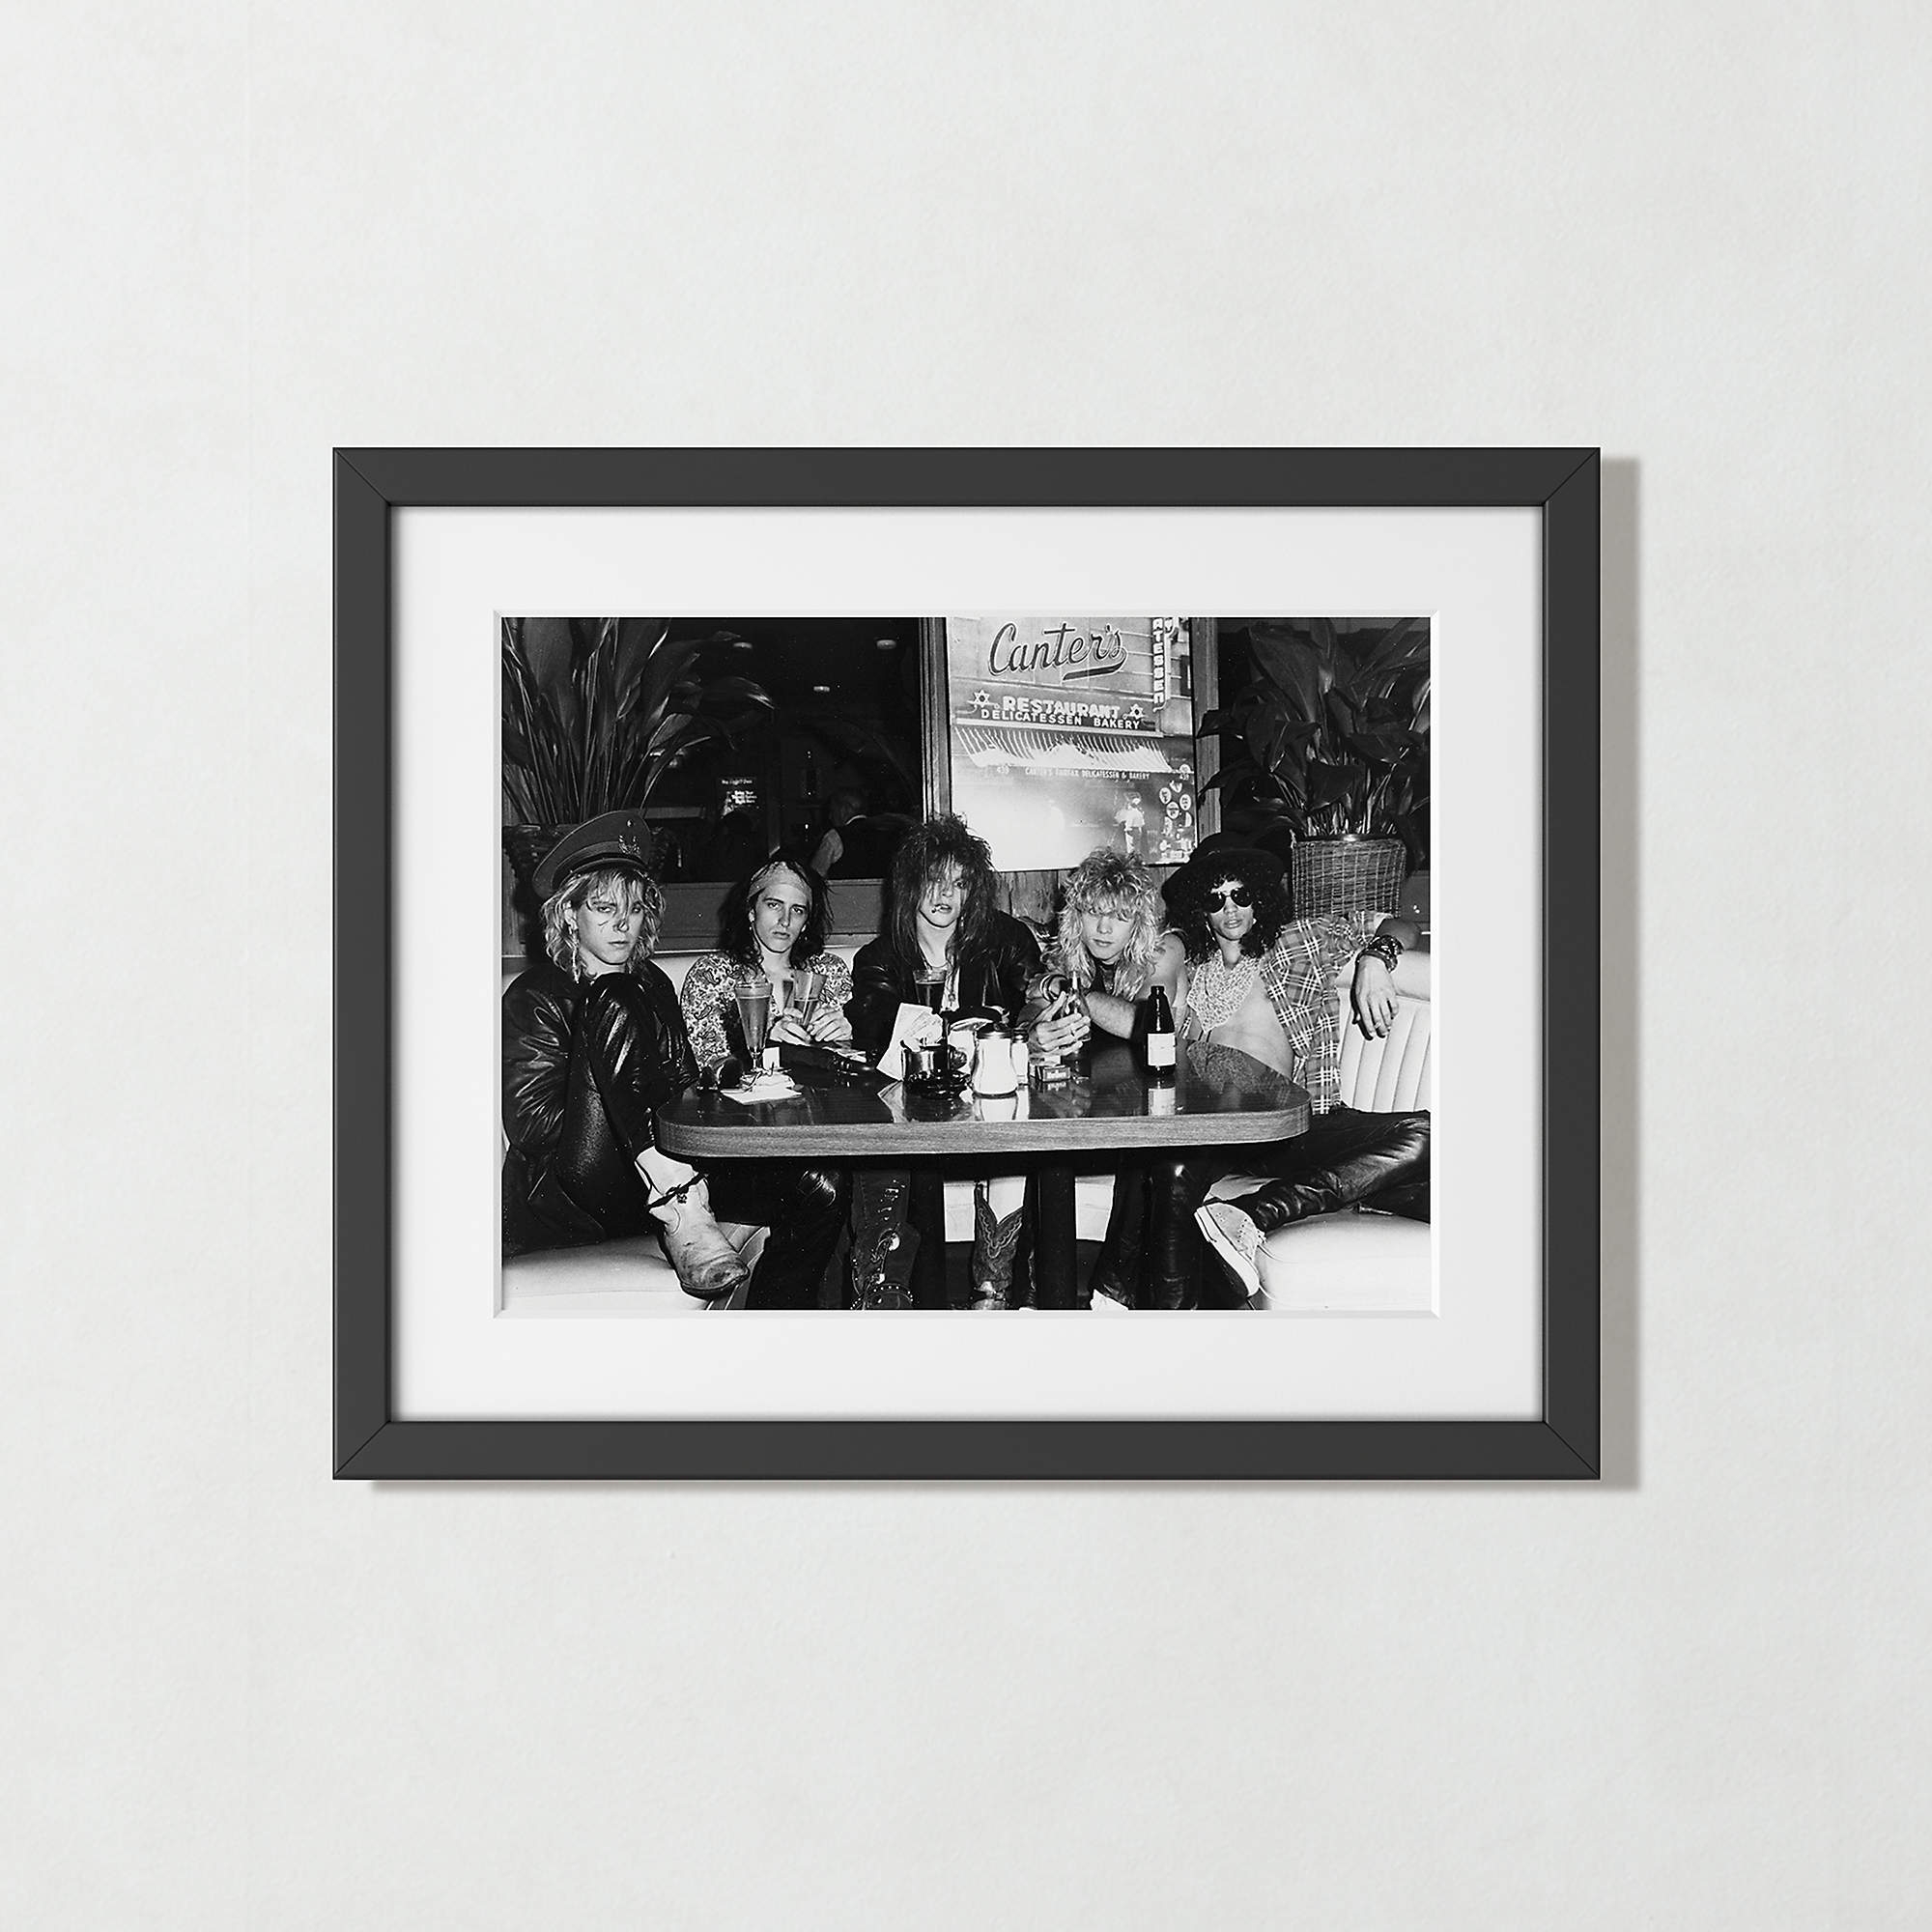 Guns N' Roses At Canters Deli with Black Frame 19.5"x15.5" - Image 0